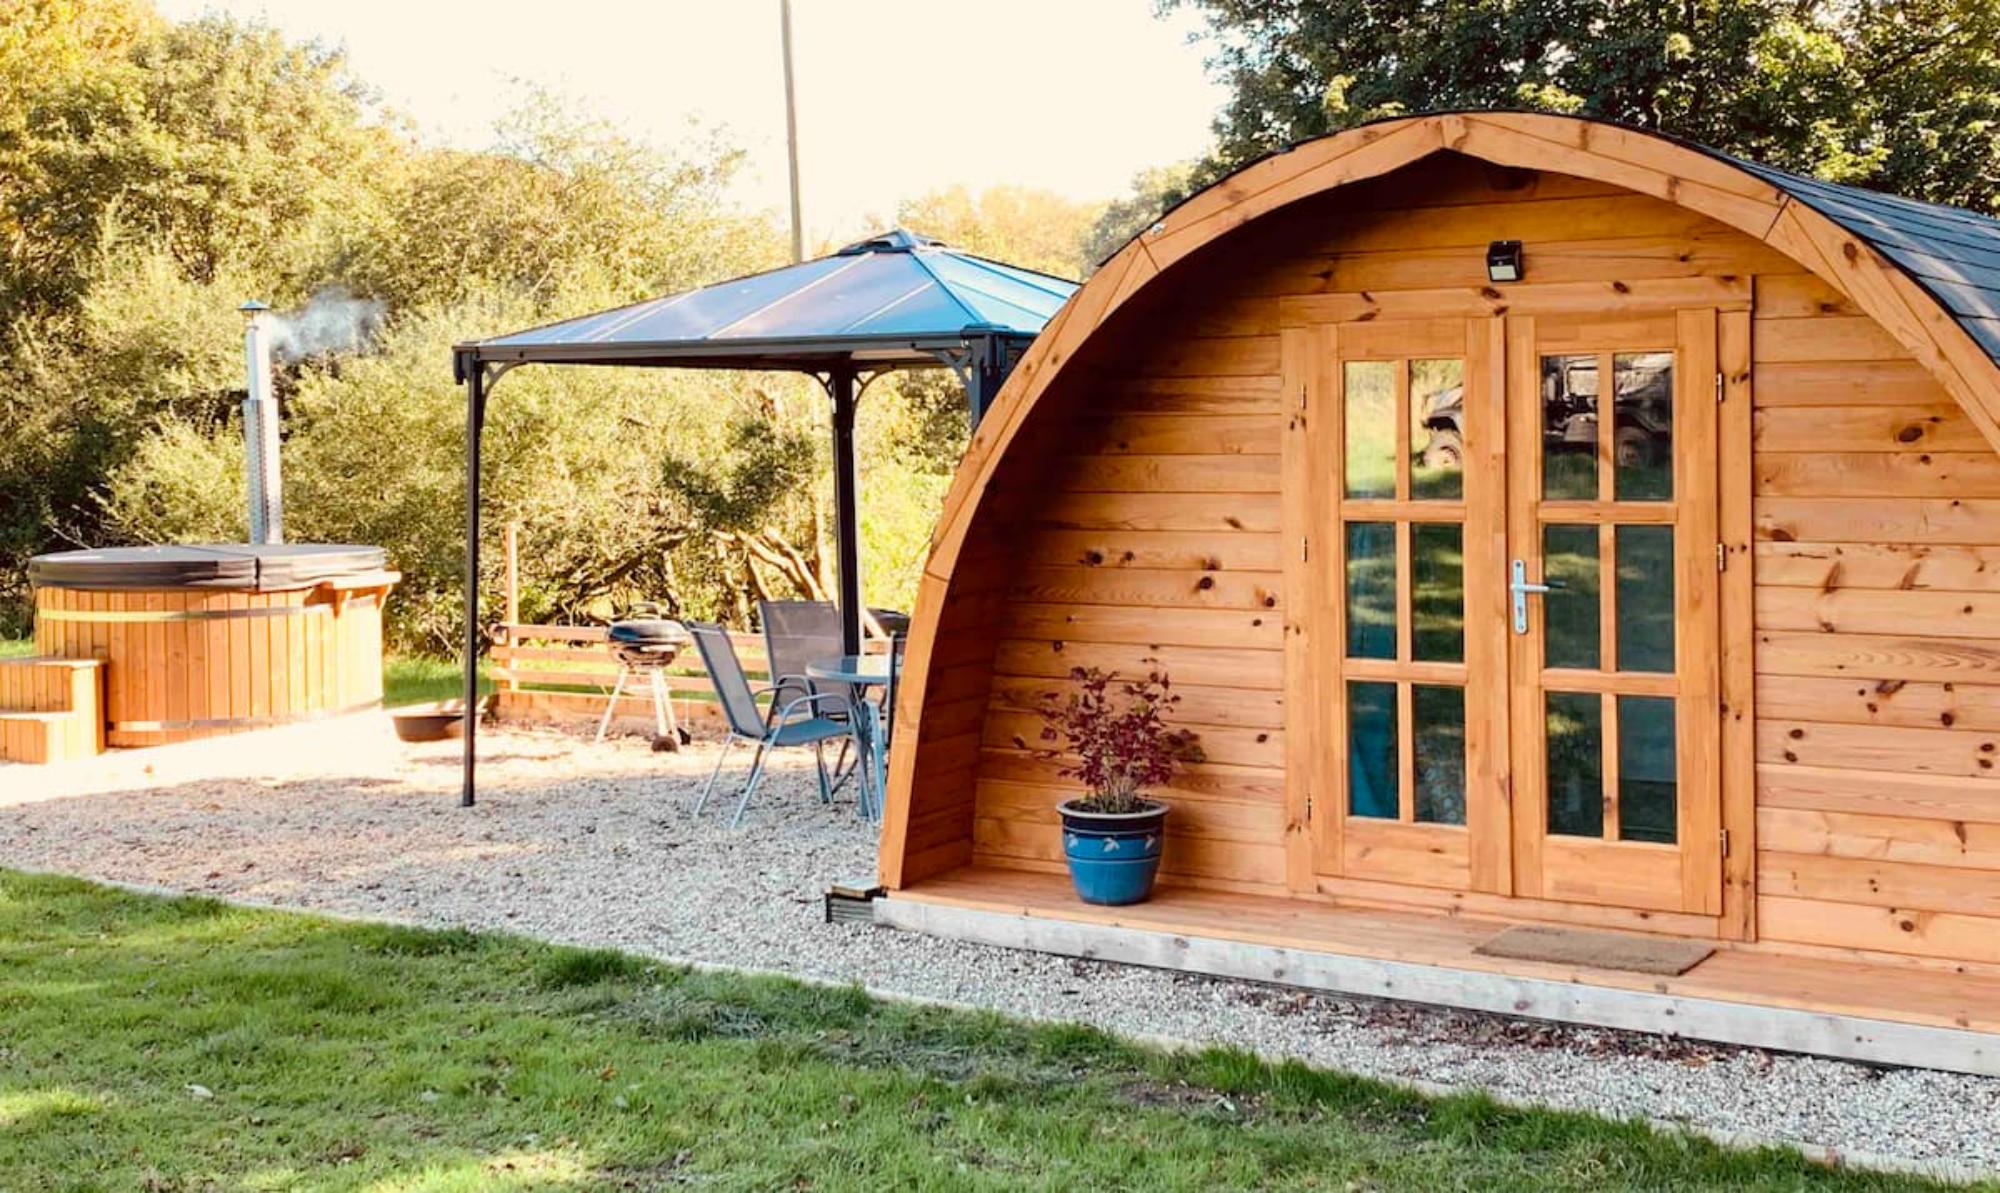 Glamping in Pod – Cool Camping